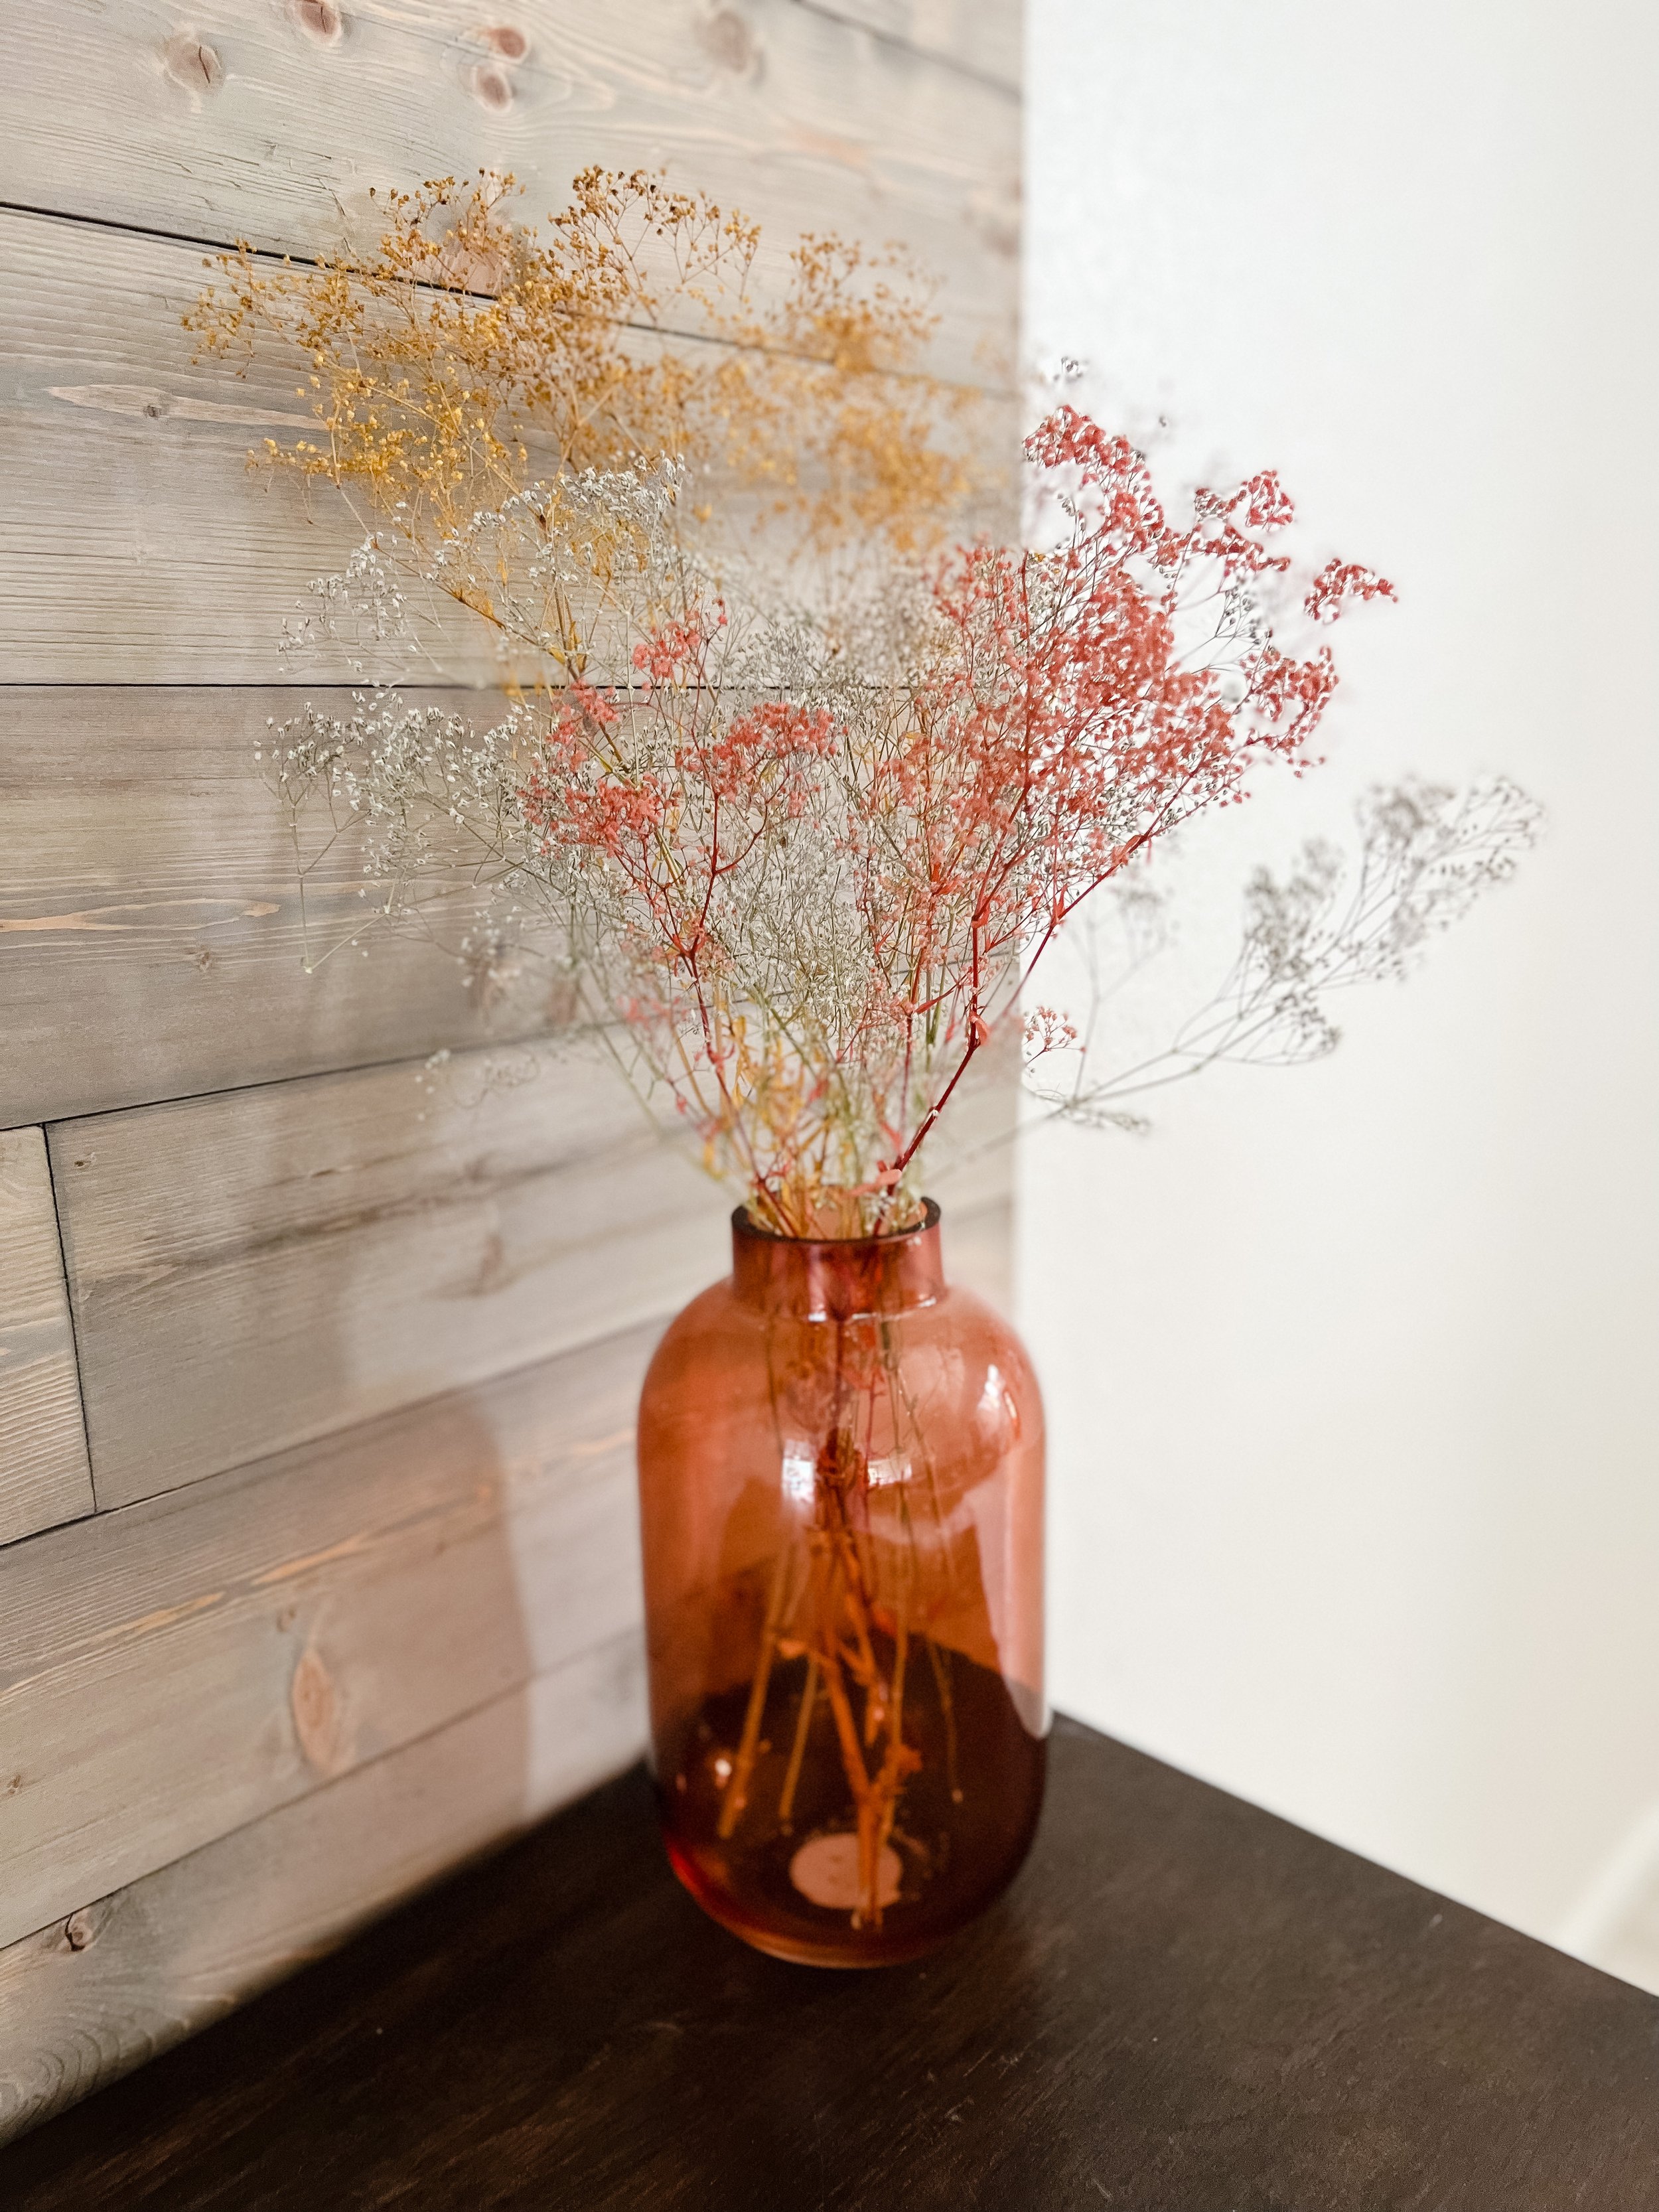 Decorating for fall and halloween with dried colored baby's breath